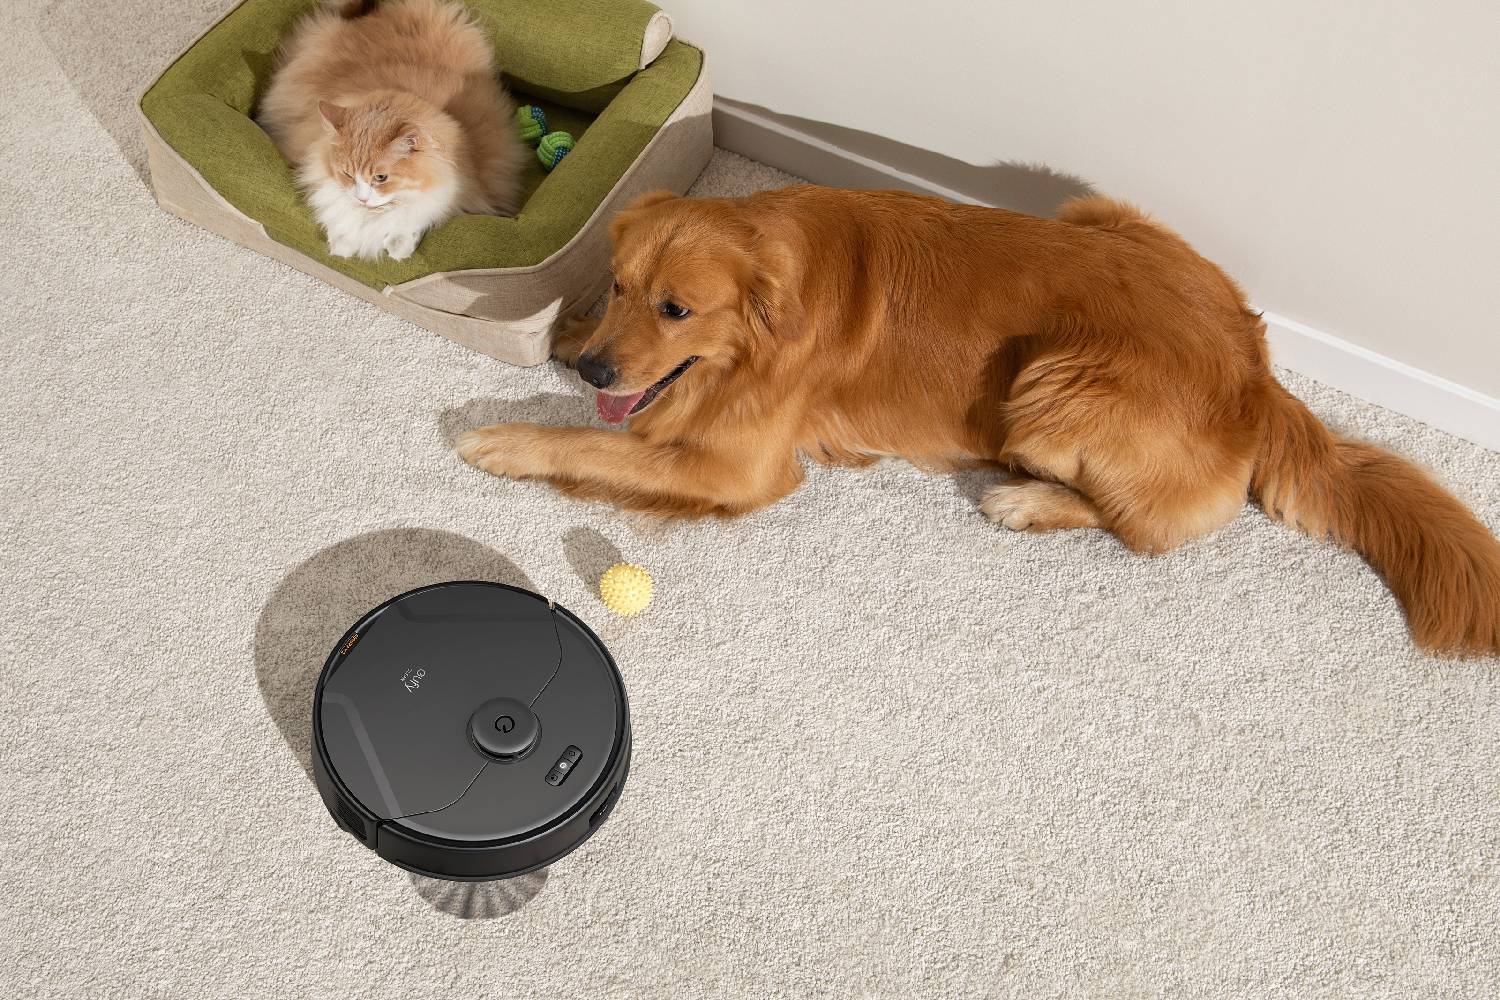 A cat and dog sit with a black Eufy X8 Pro robot vacuum cleaner.